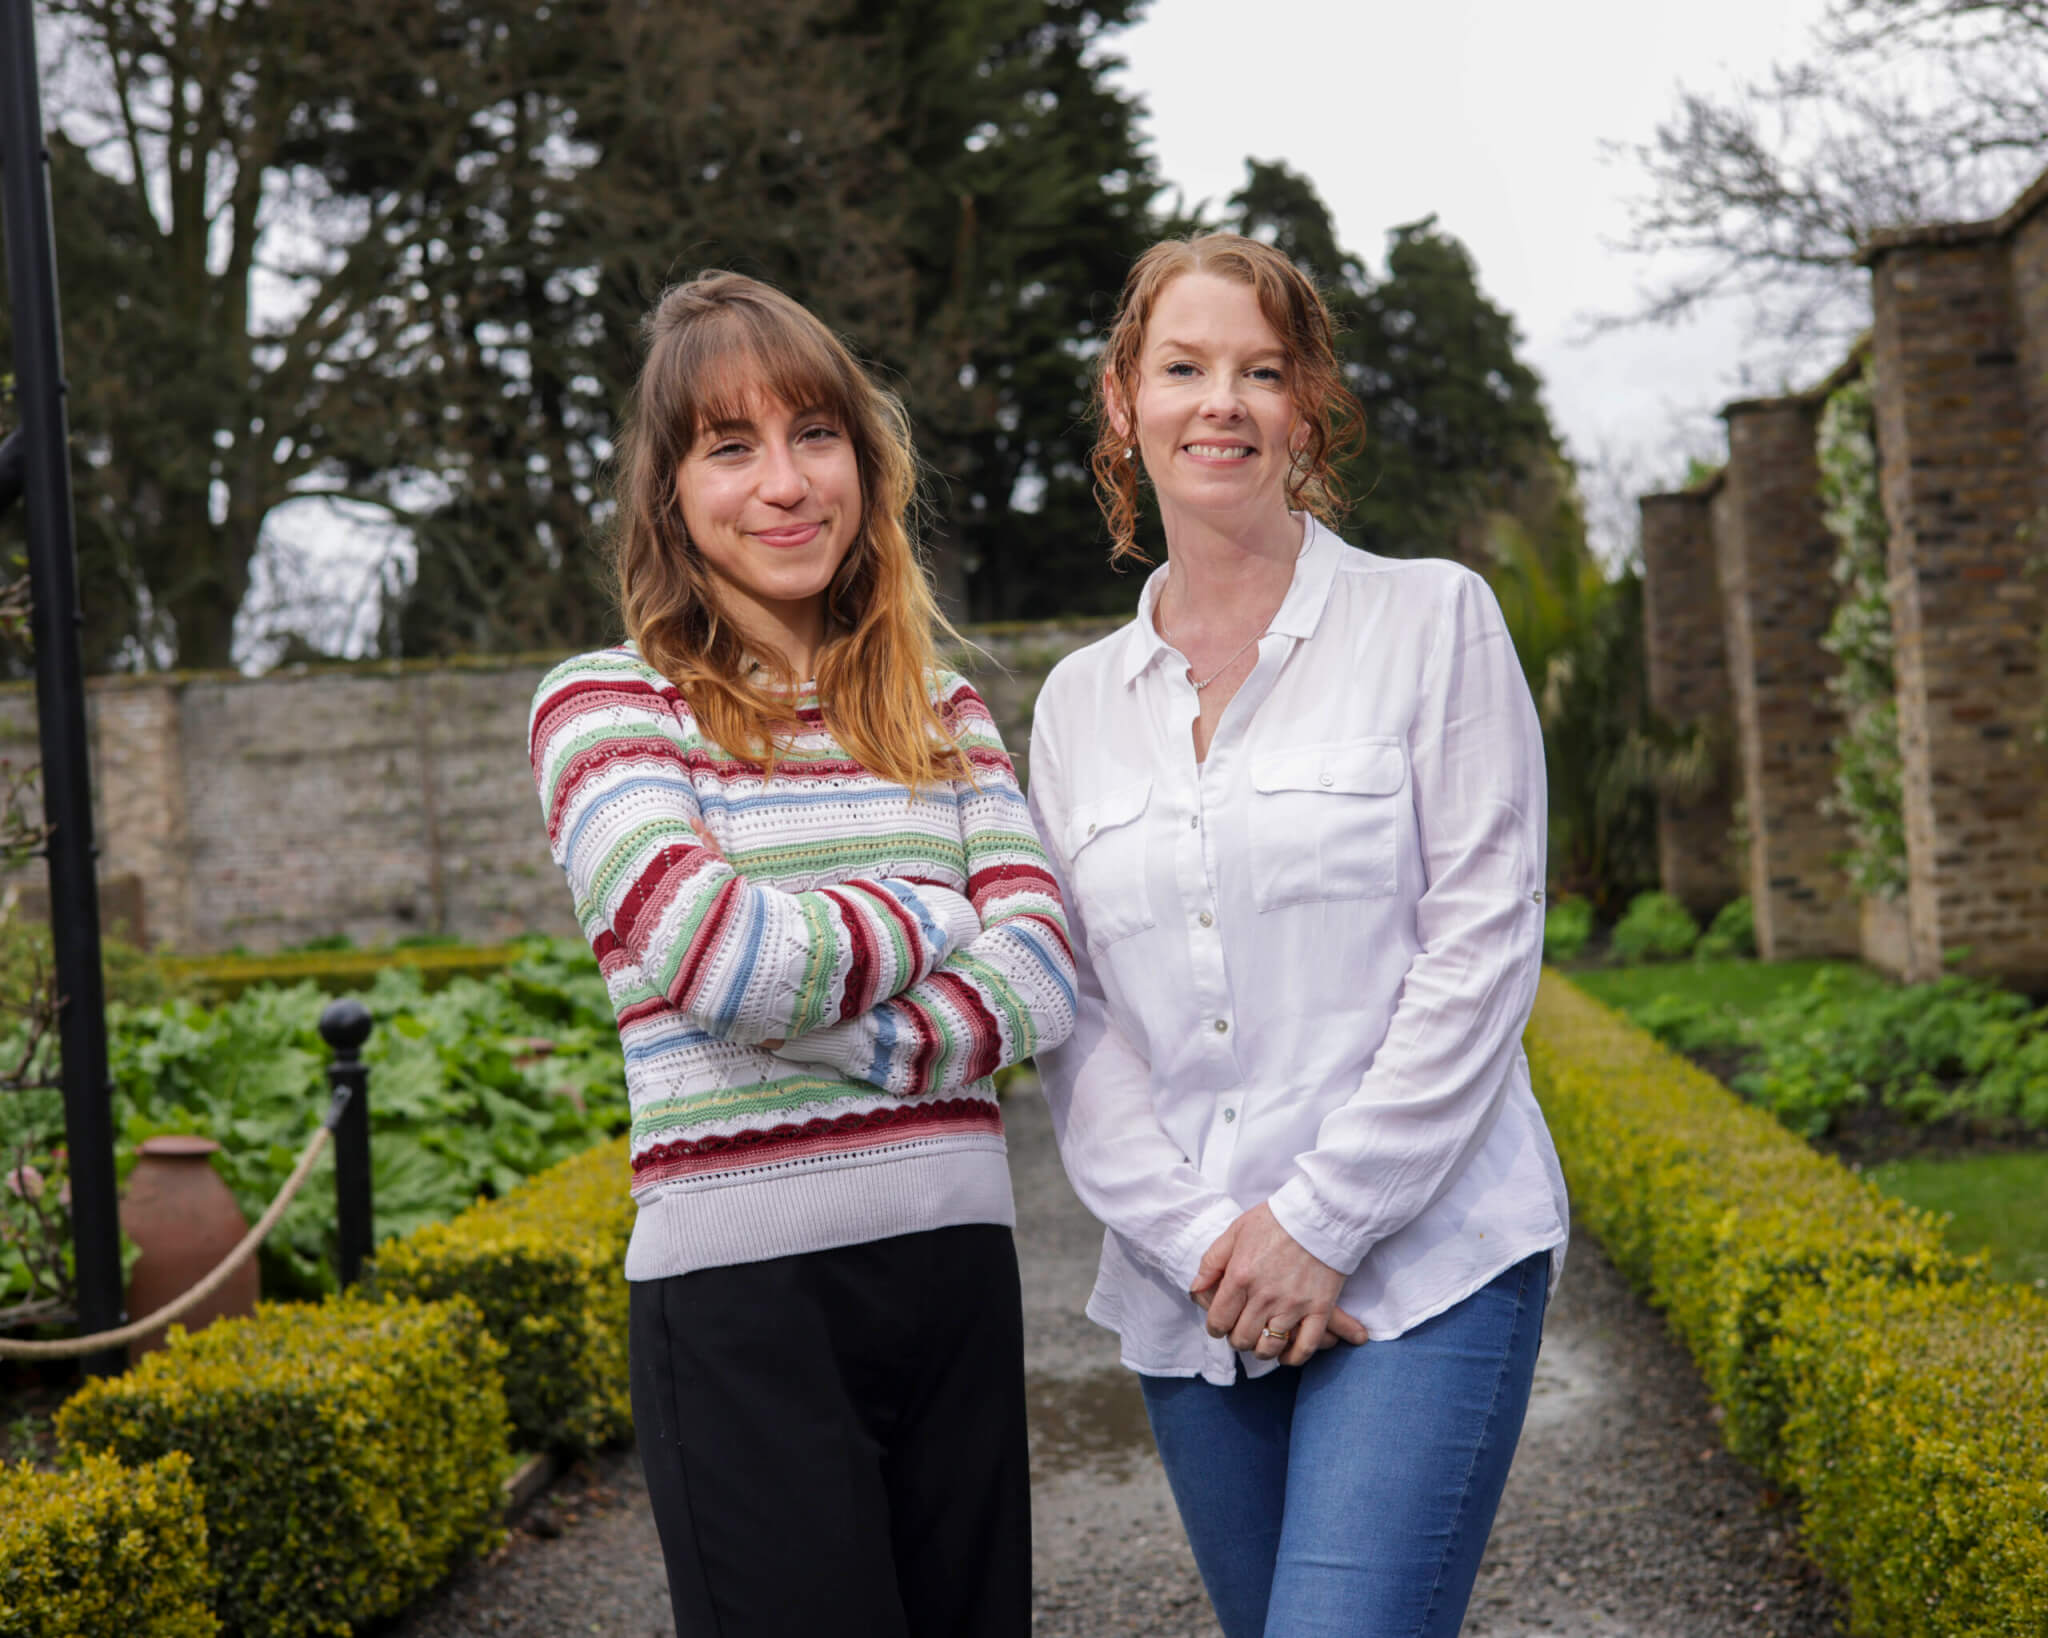 Two garden designers shine in ‘Cultivating Talent’ initiative